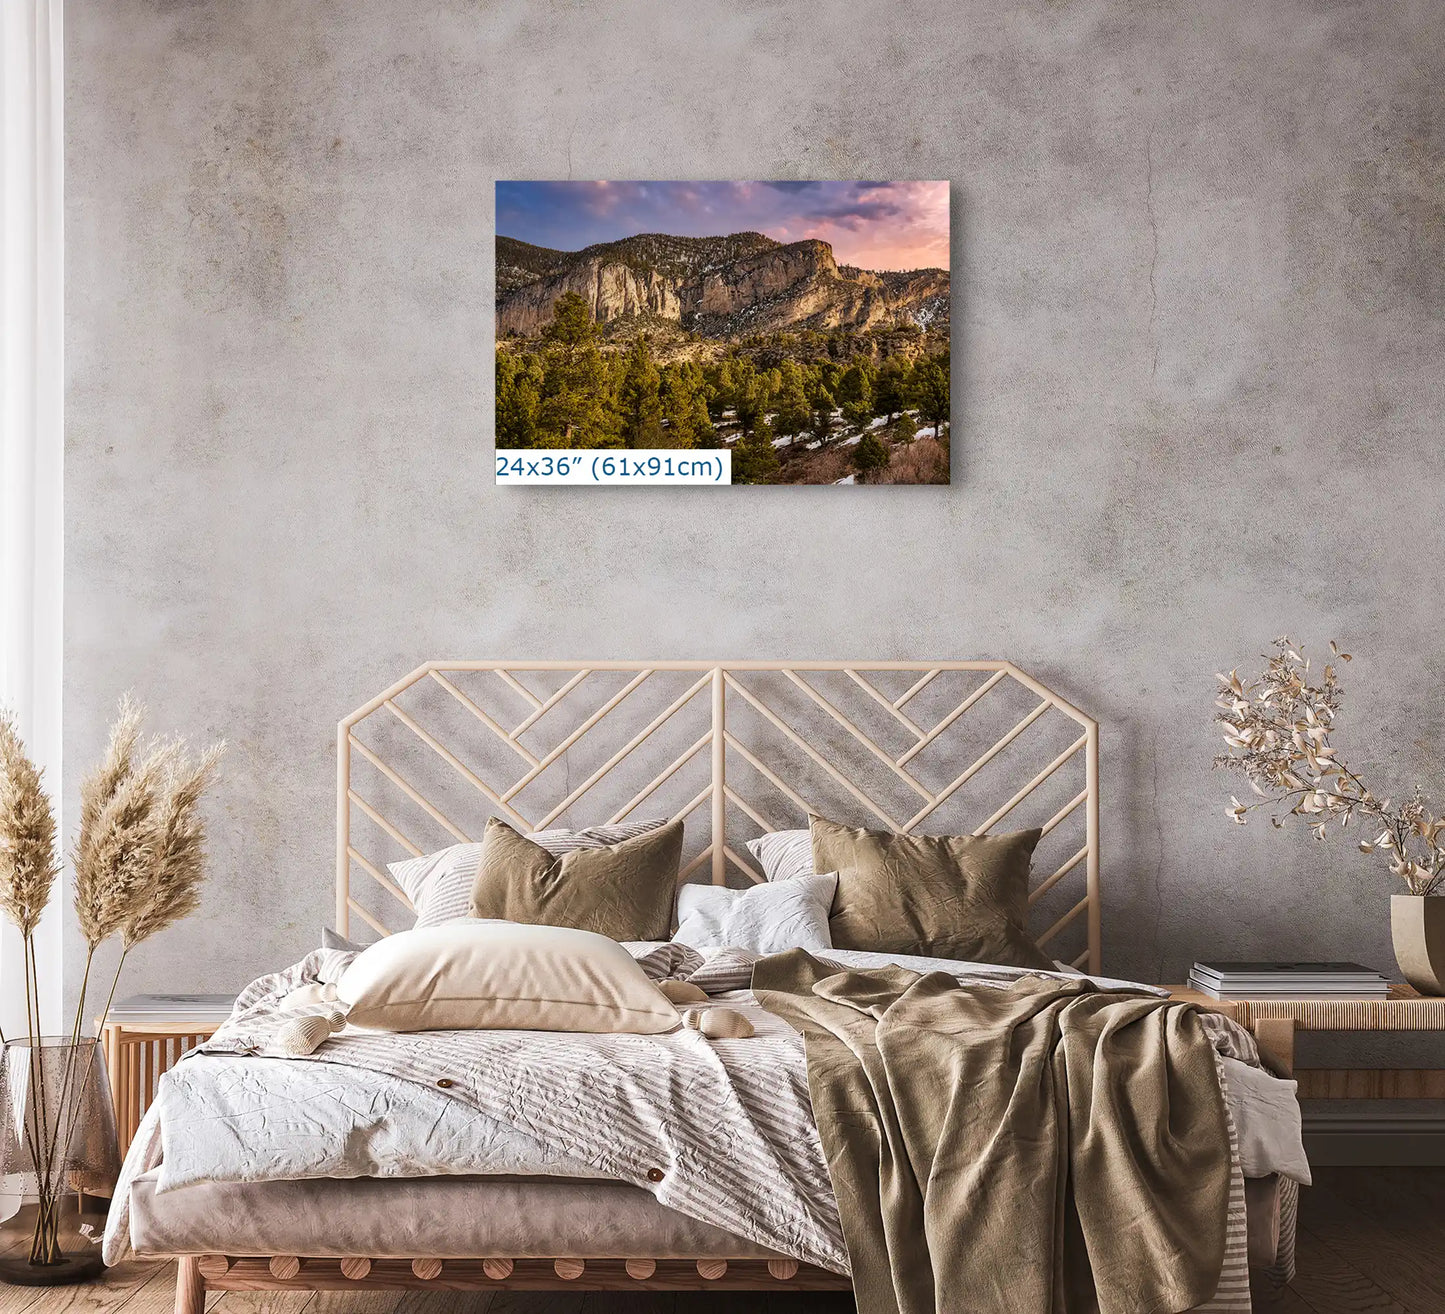 The 24x36 canvas of Fletcher Peak at Mt Charleston above a bed, its mesmerizing hues and awe-inspiring landscape invite a sense of vibrant tranquility into the bedroom retreat.